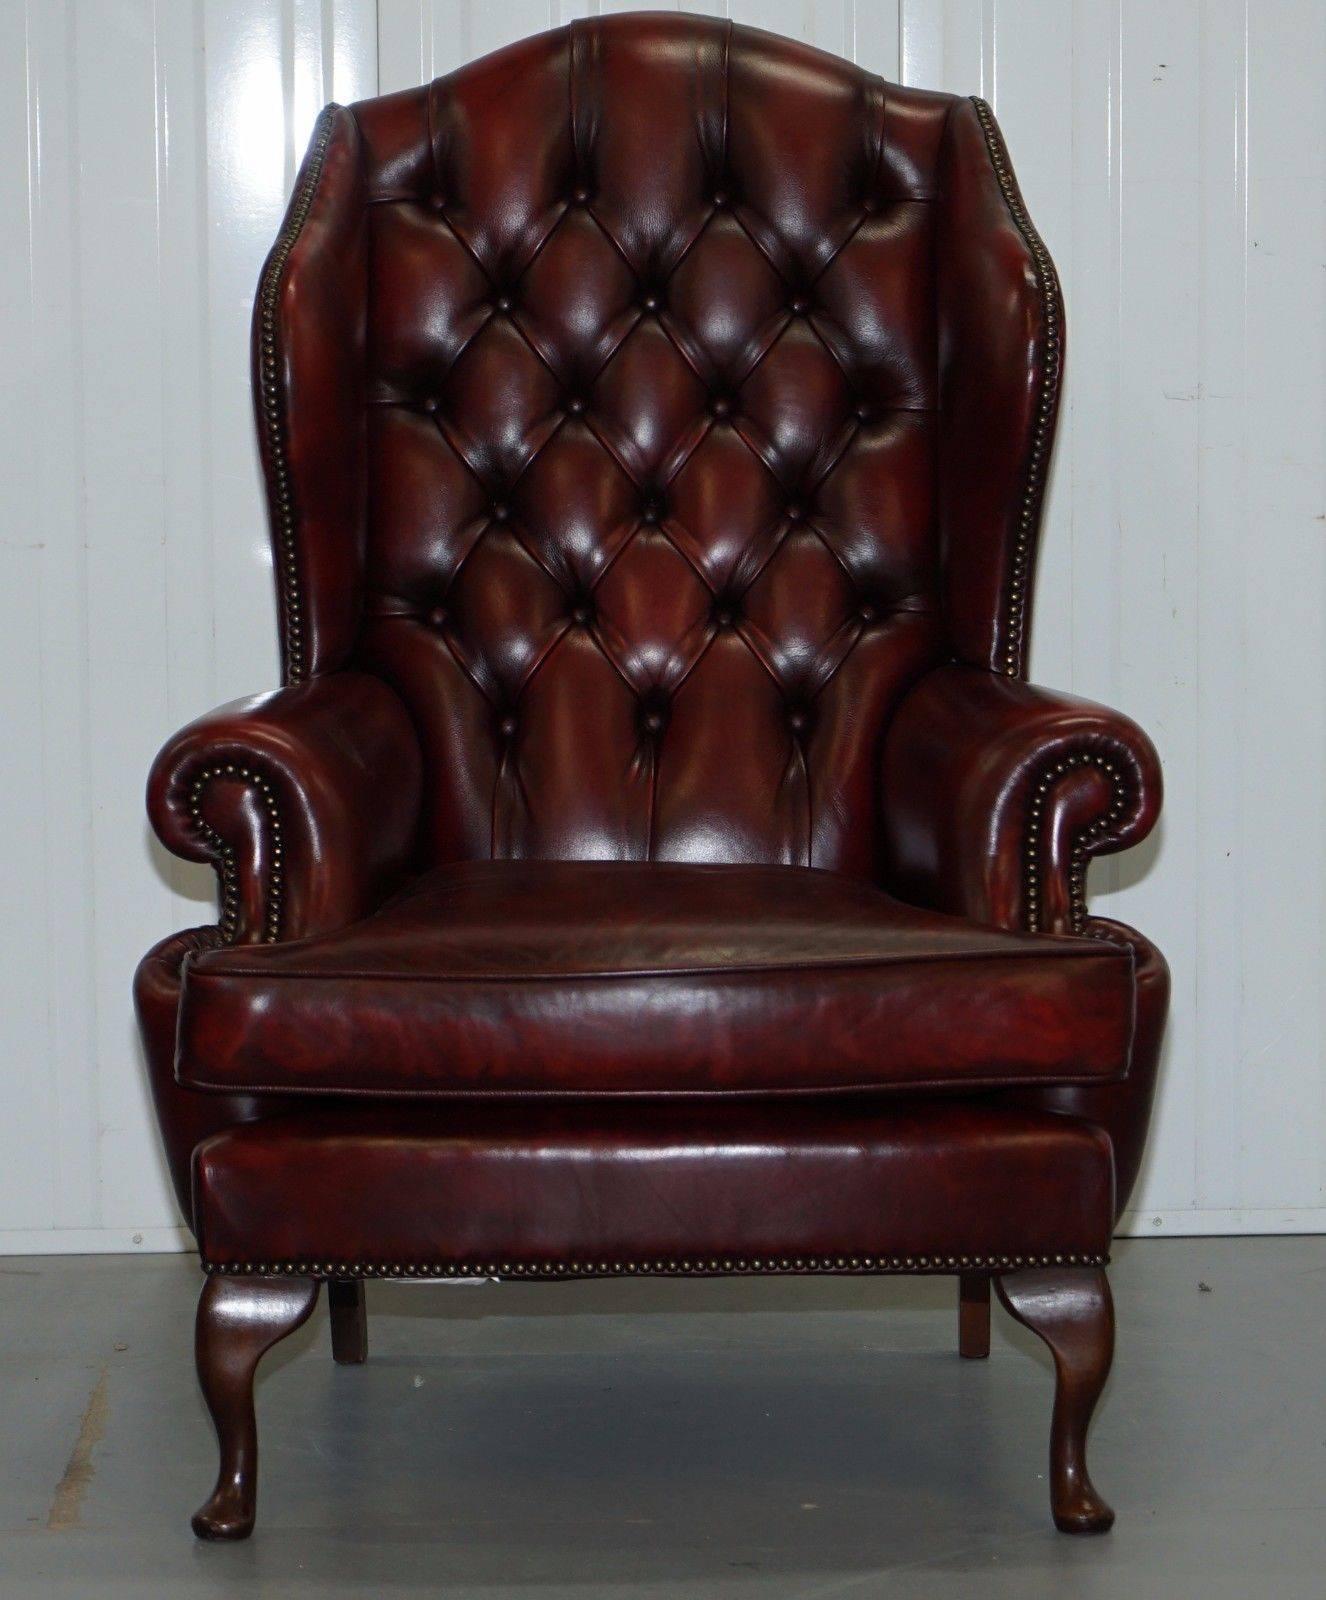 Wimbledon-Furniture

Wimbledon-Furniture is delighted to offer for sale this lovely Bevan Funnell November William Morris style oxblood leather wingback armchair RRP £3,320

Please note the delivery fee listed is just a guide, for an accurate quote